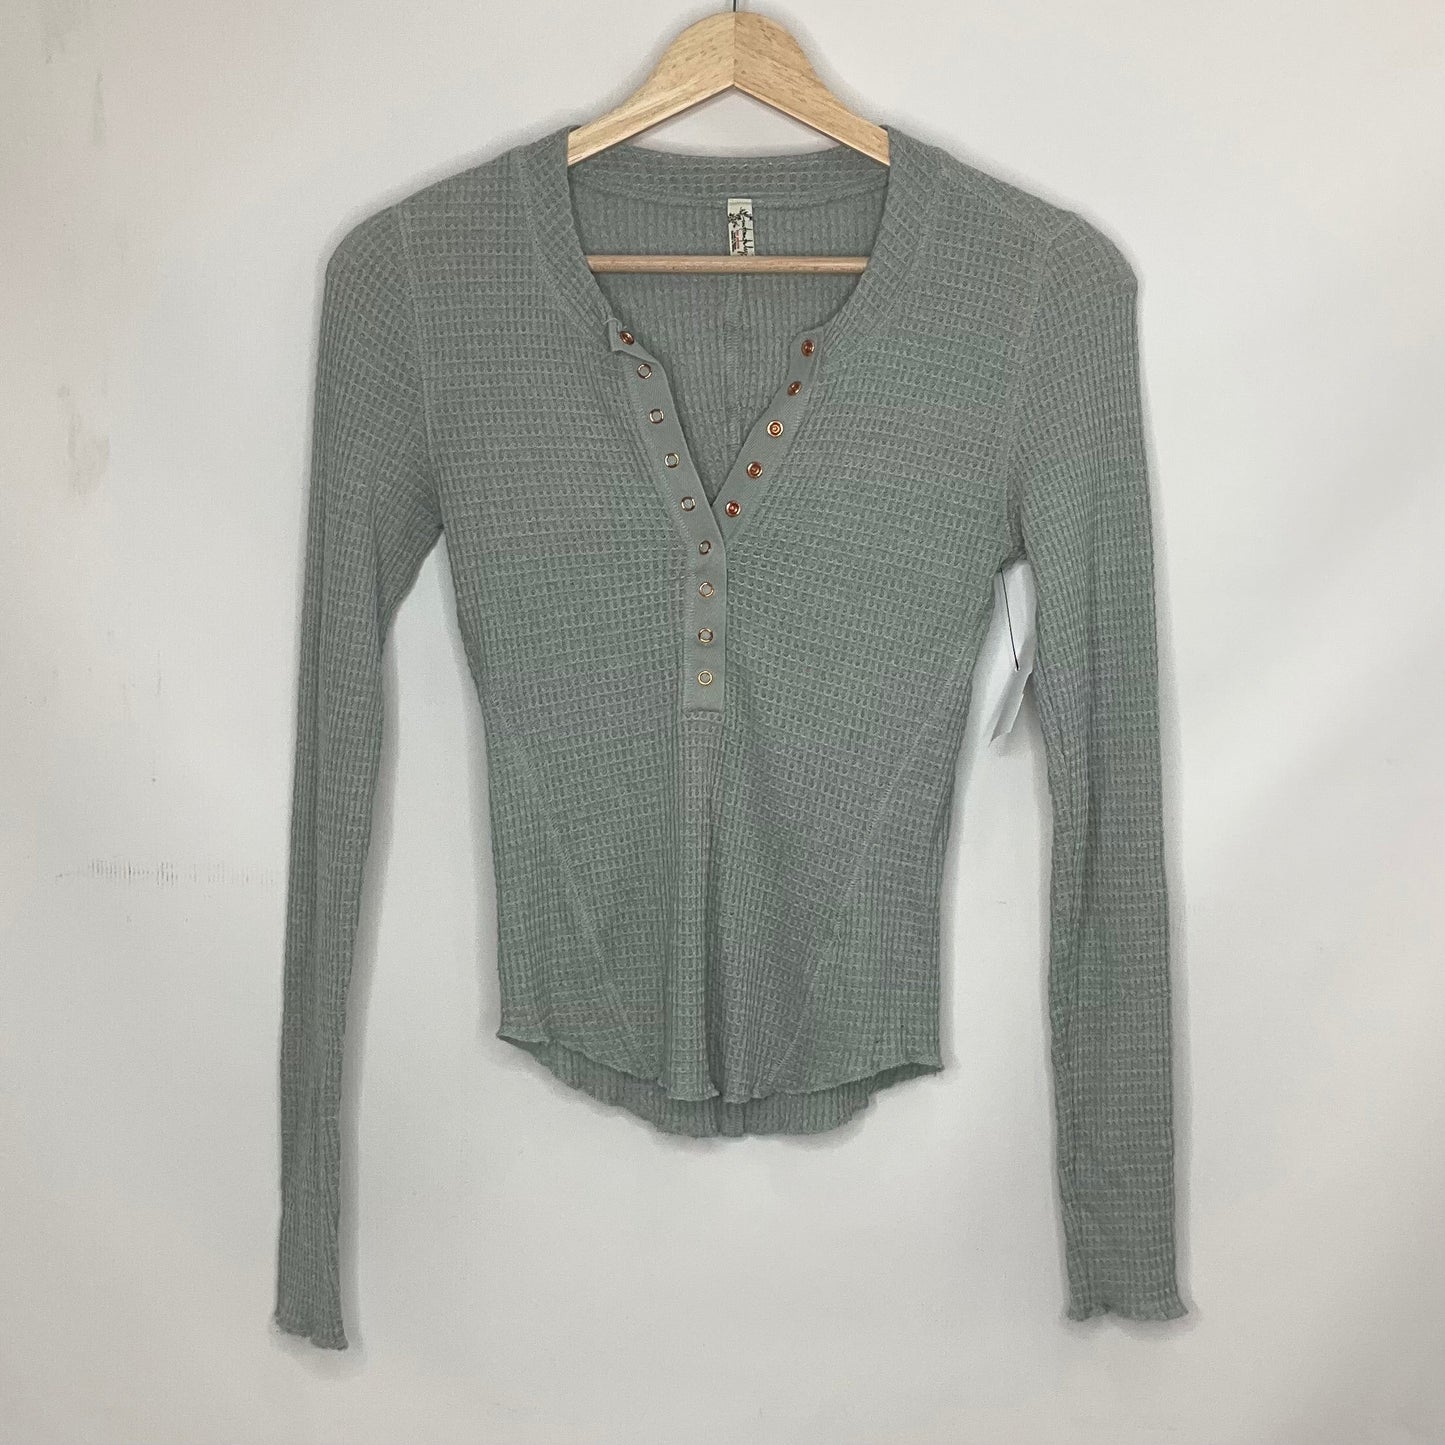 Grey Top Long Sleeve Free People, Size Xs